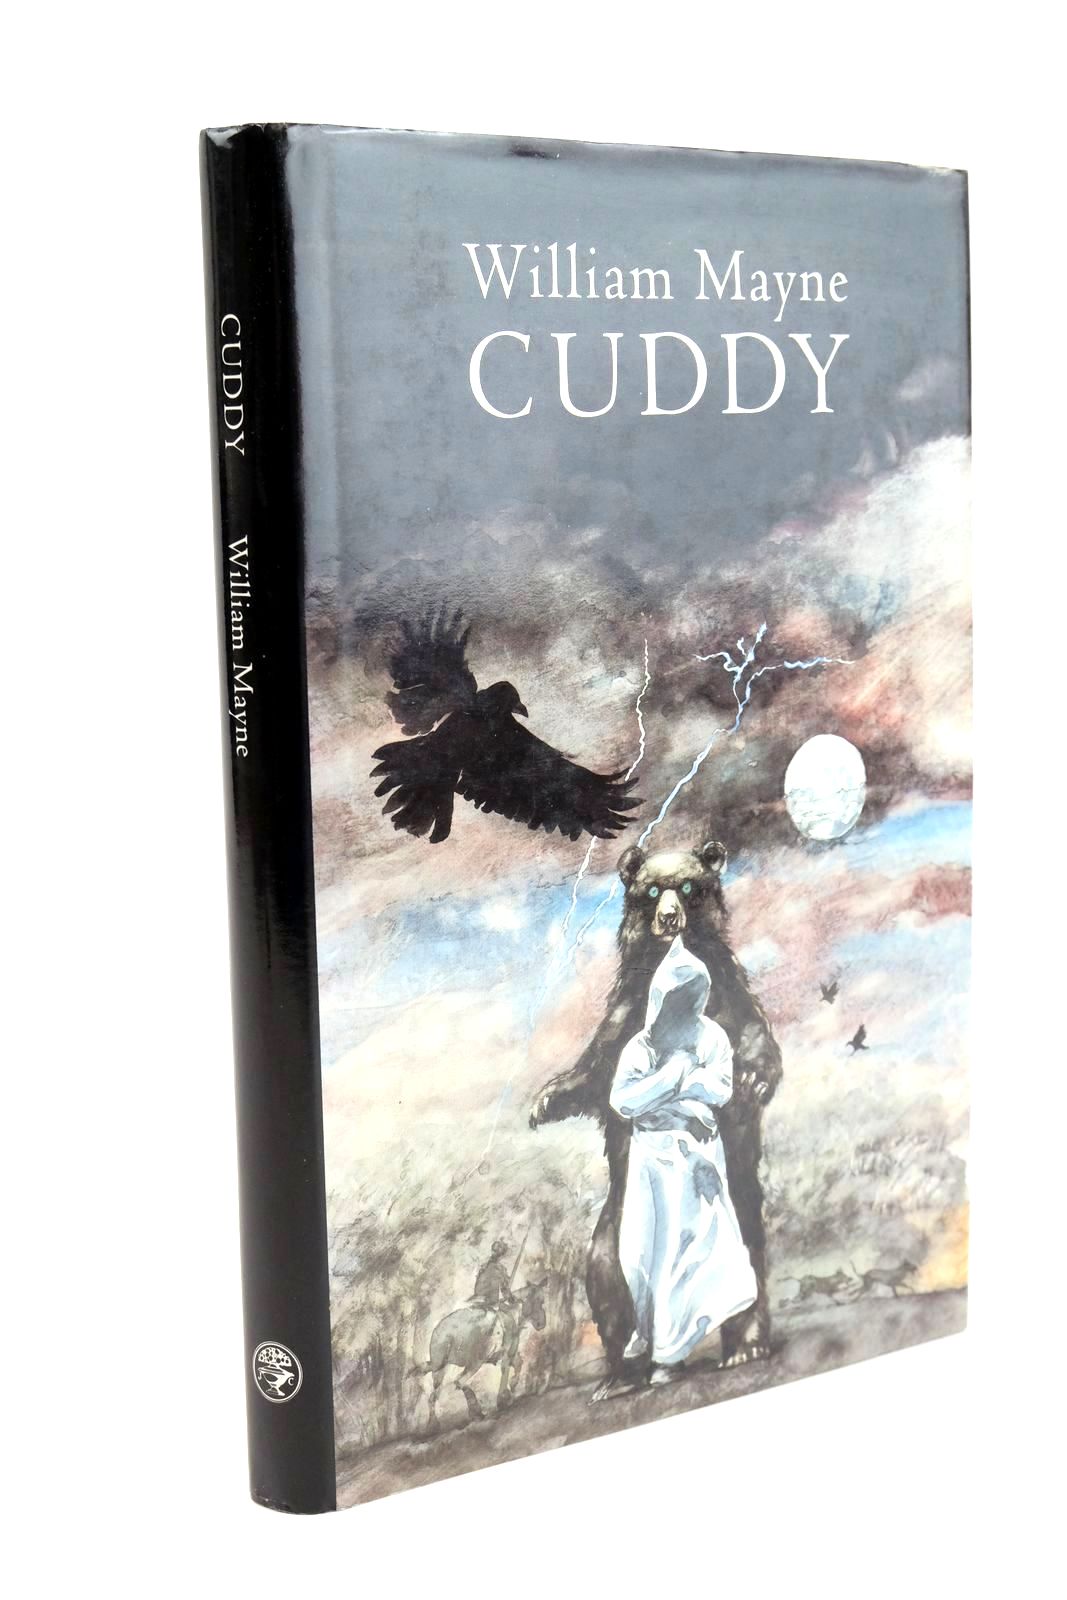 Photo of CUDDY written by Mayne, William published by Jonathan Cape (STOCK CODE: 1323480)  for sale by Stella & Rose's Books